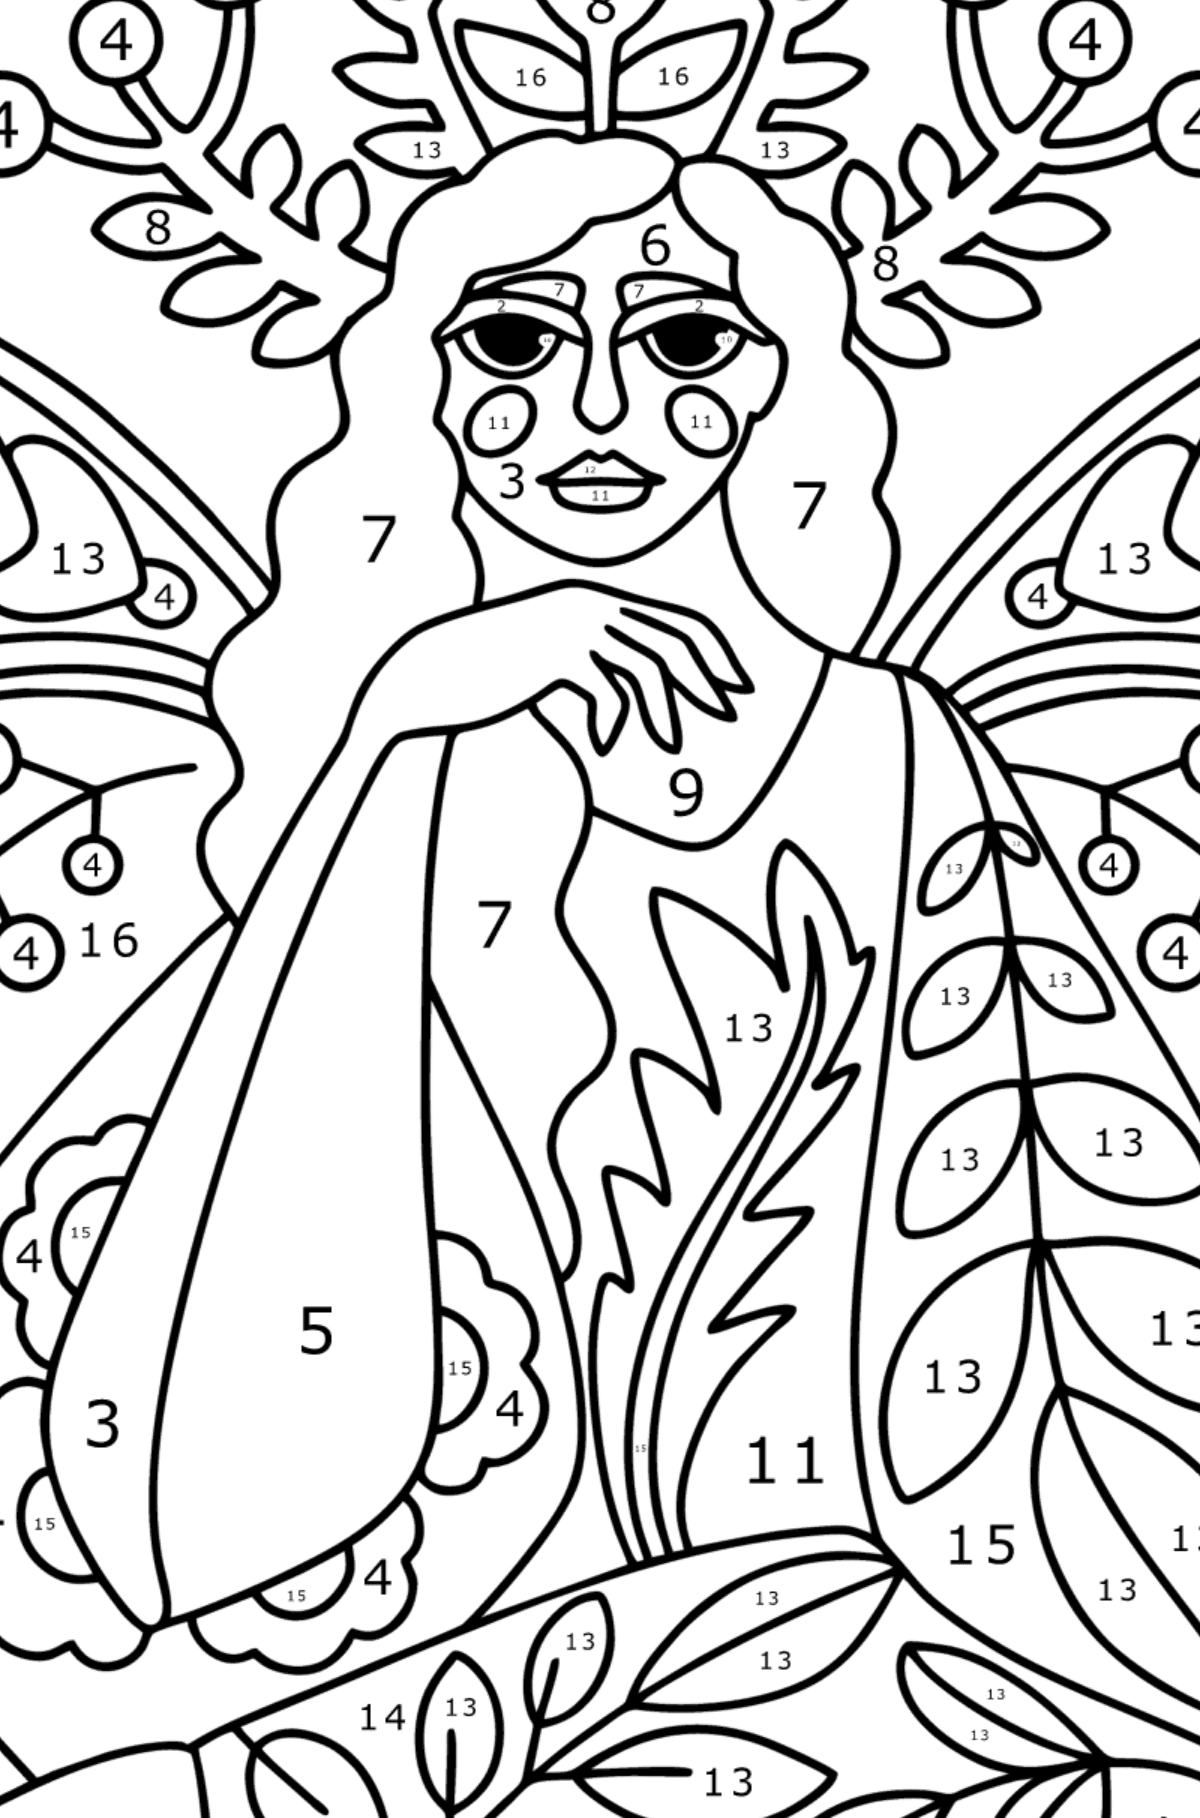 Fairy Tattoo (difficult) coloring page - Coloring by Numbers for Kids